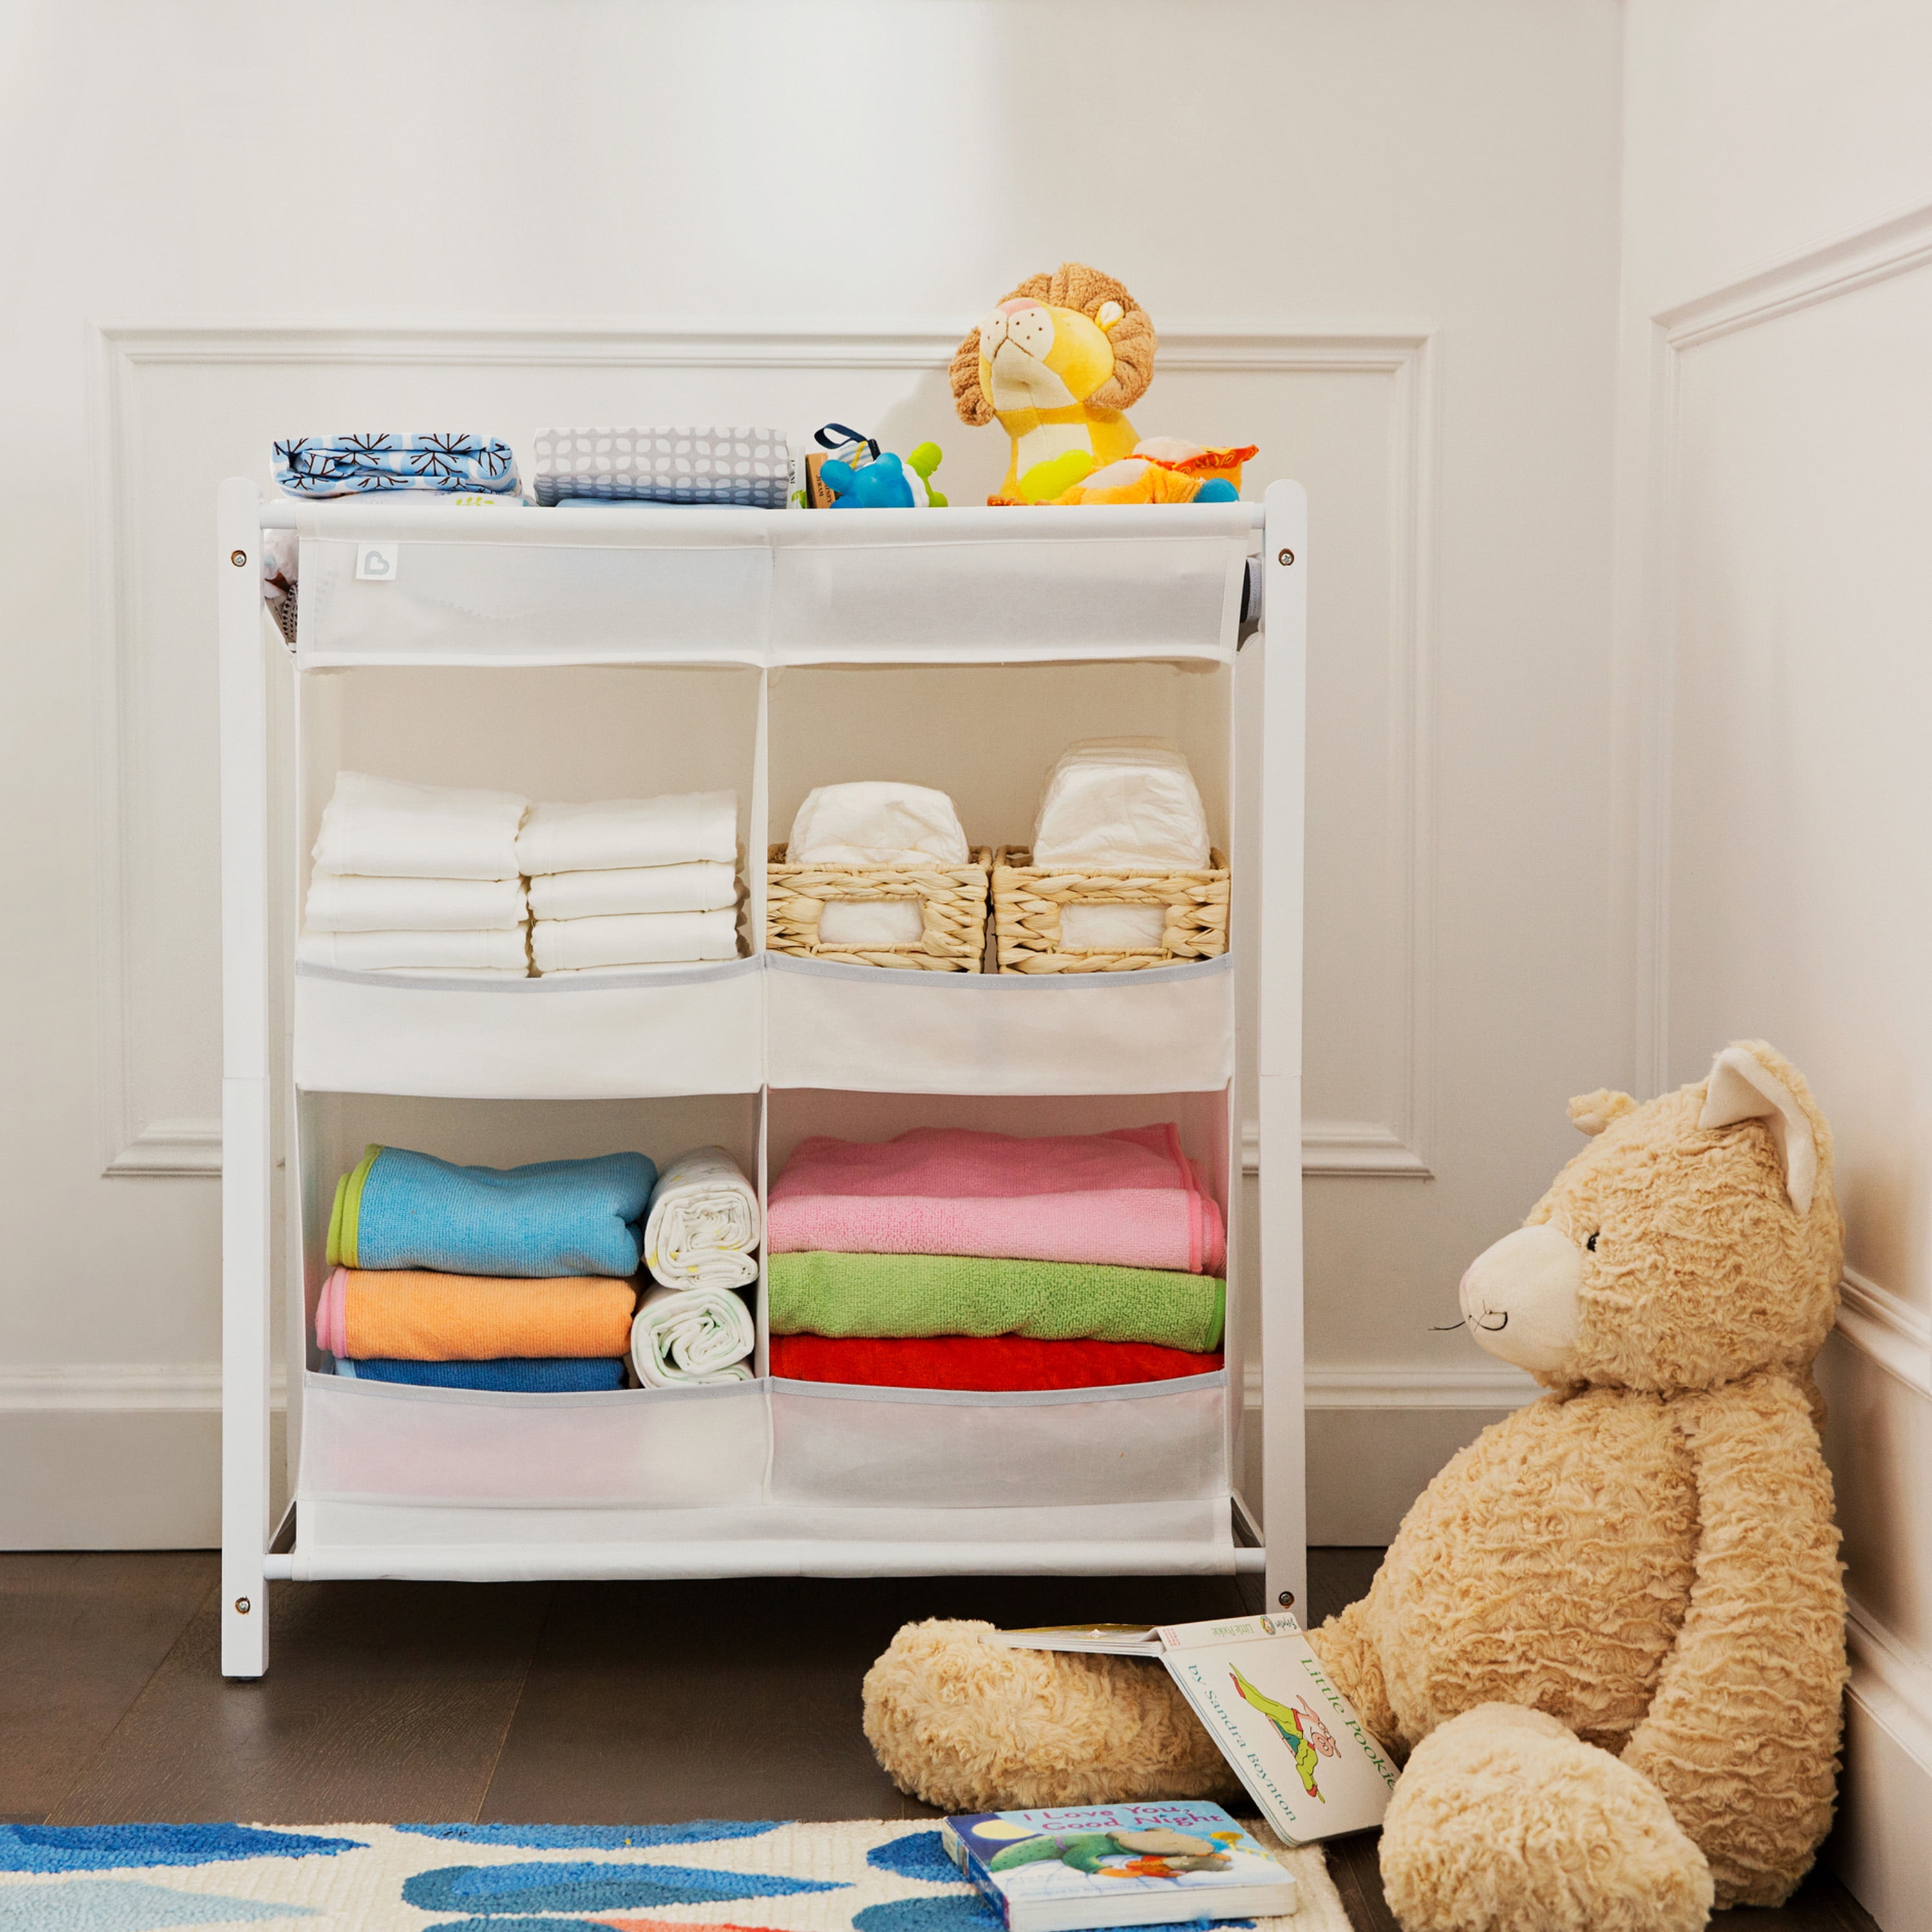 Buy Munchkin Baby Nappy Change Organiser Online at Low Prices in